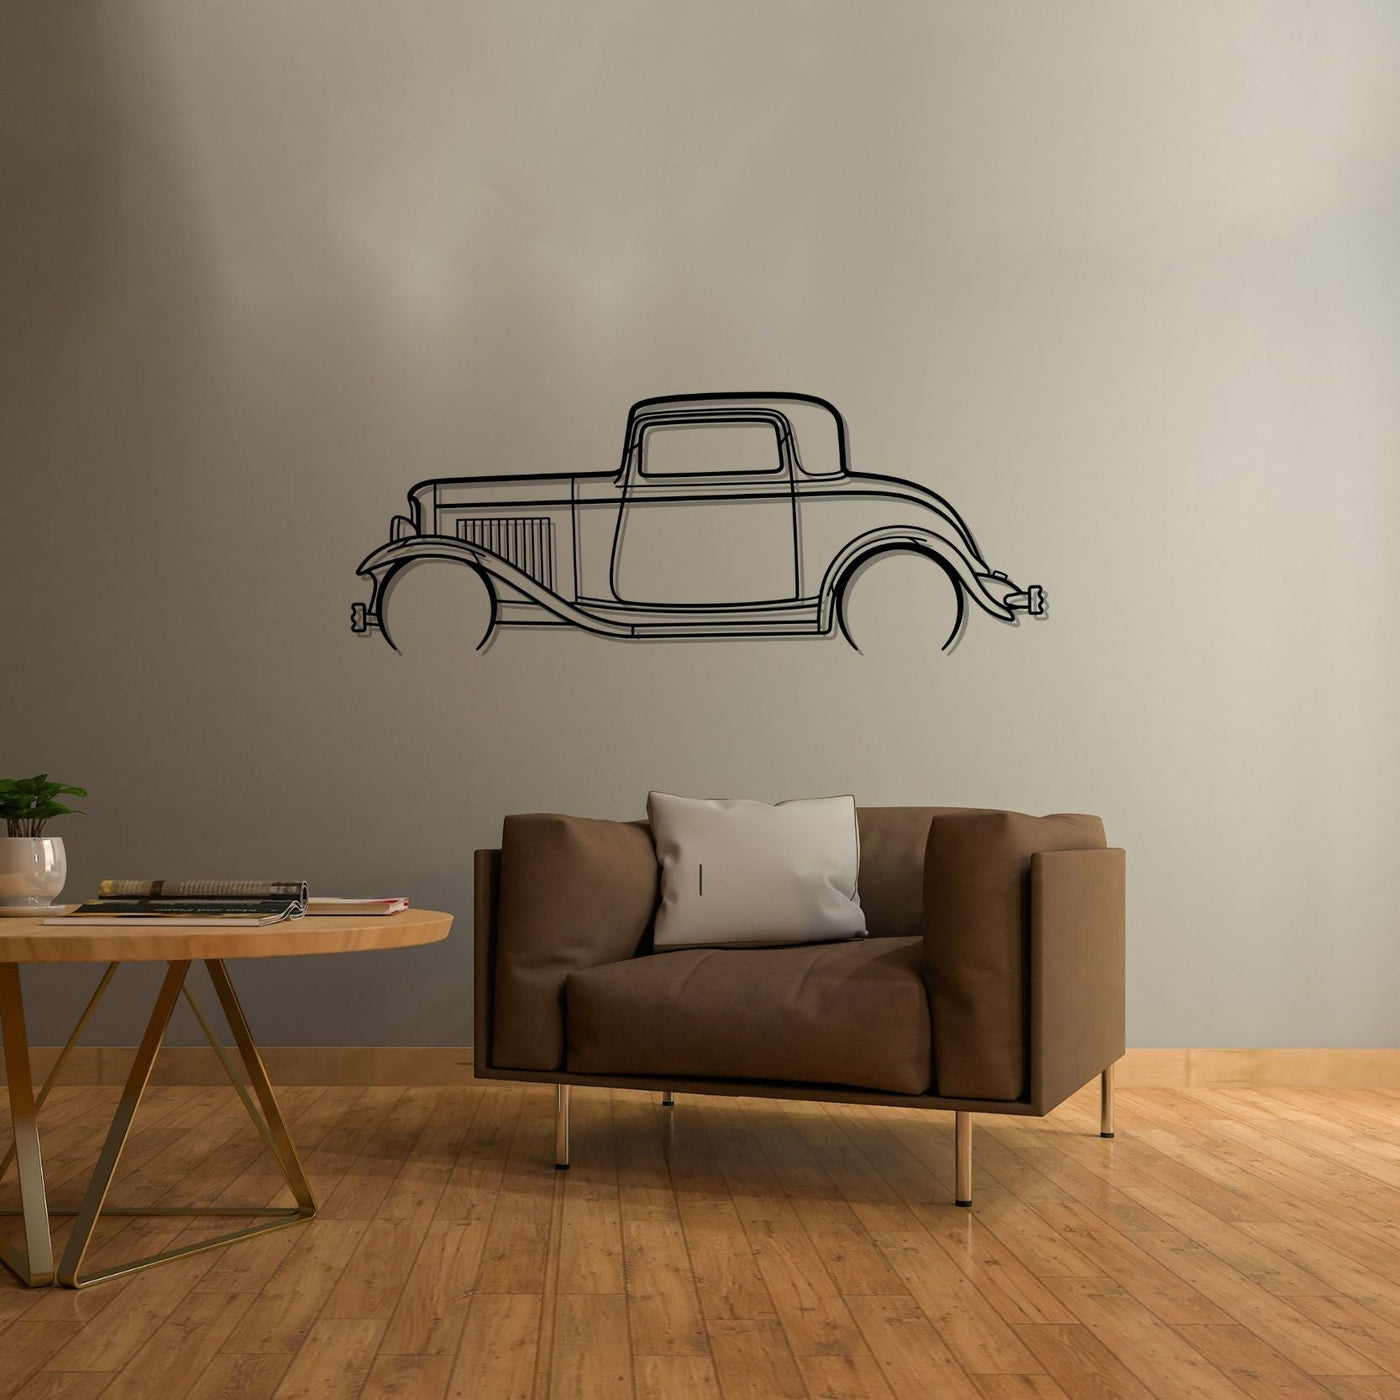 3 Window Coupe 1932 Detailed Silhouette Metal Wall Art